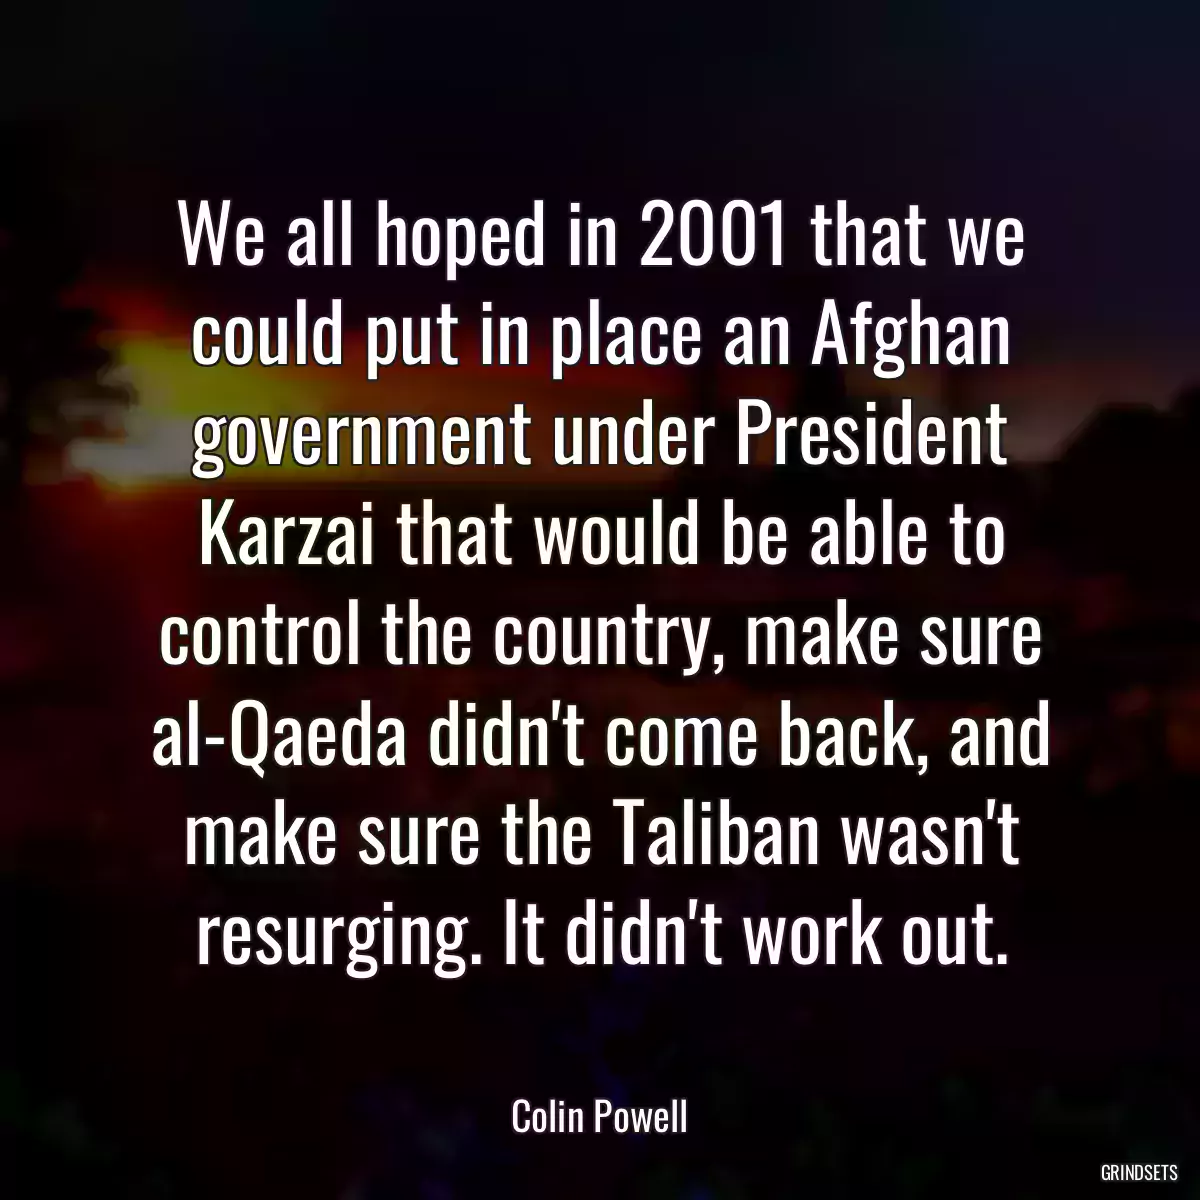 We all hoped in 2001 that we could put in place an Afghan government under President Karzai that would be able to control the country, make sure al-Qaeda didn\'t come back, and make sure the Taliban wasn\'t resurging. It didn\'t work out.